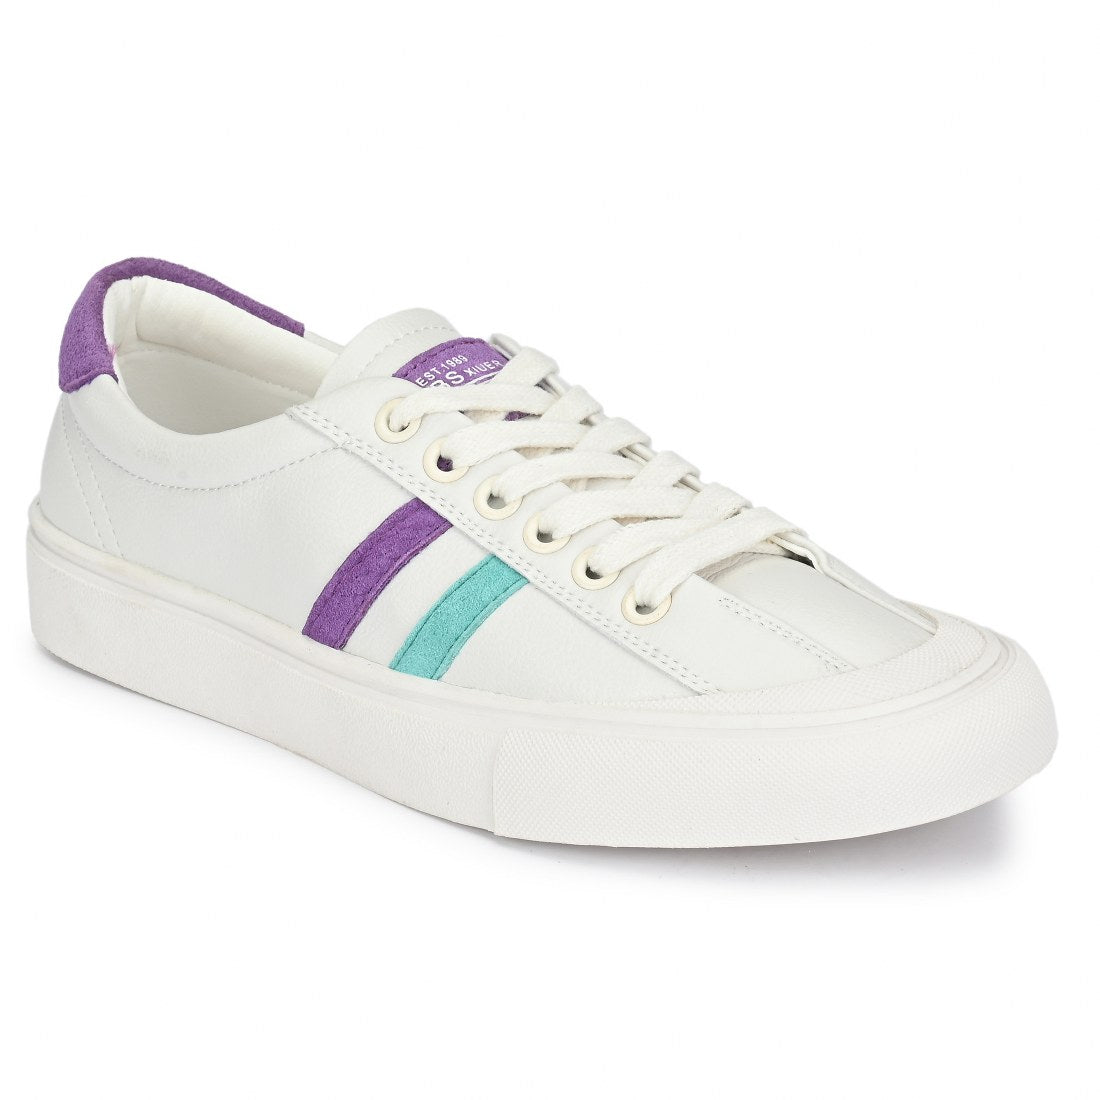 W-DIMP-1018 WOMEN LEATHERITE WHITE CASUAL LACE UP SNEAKERS